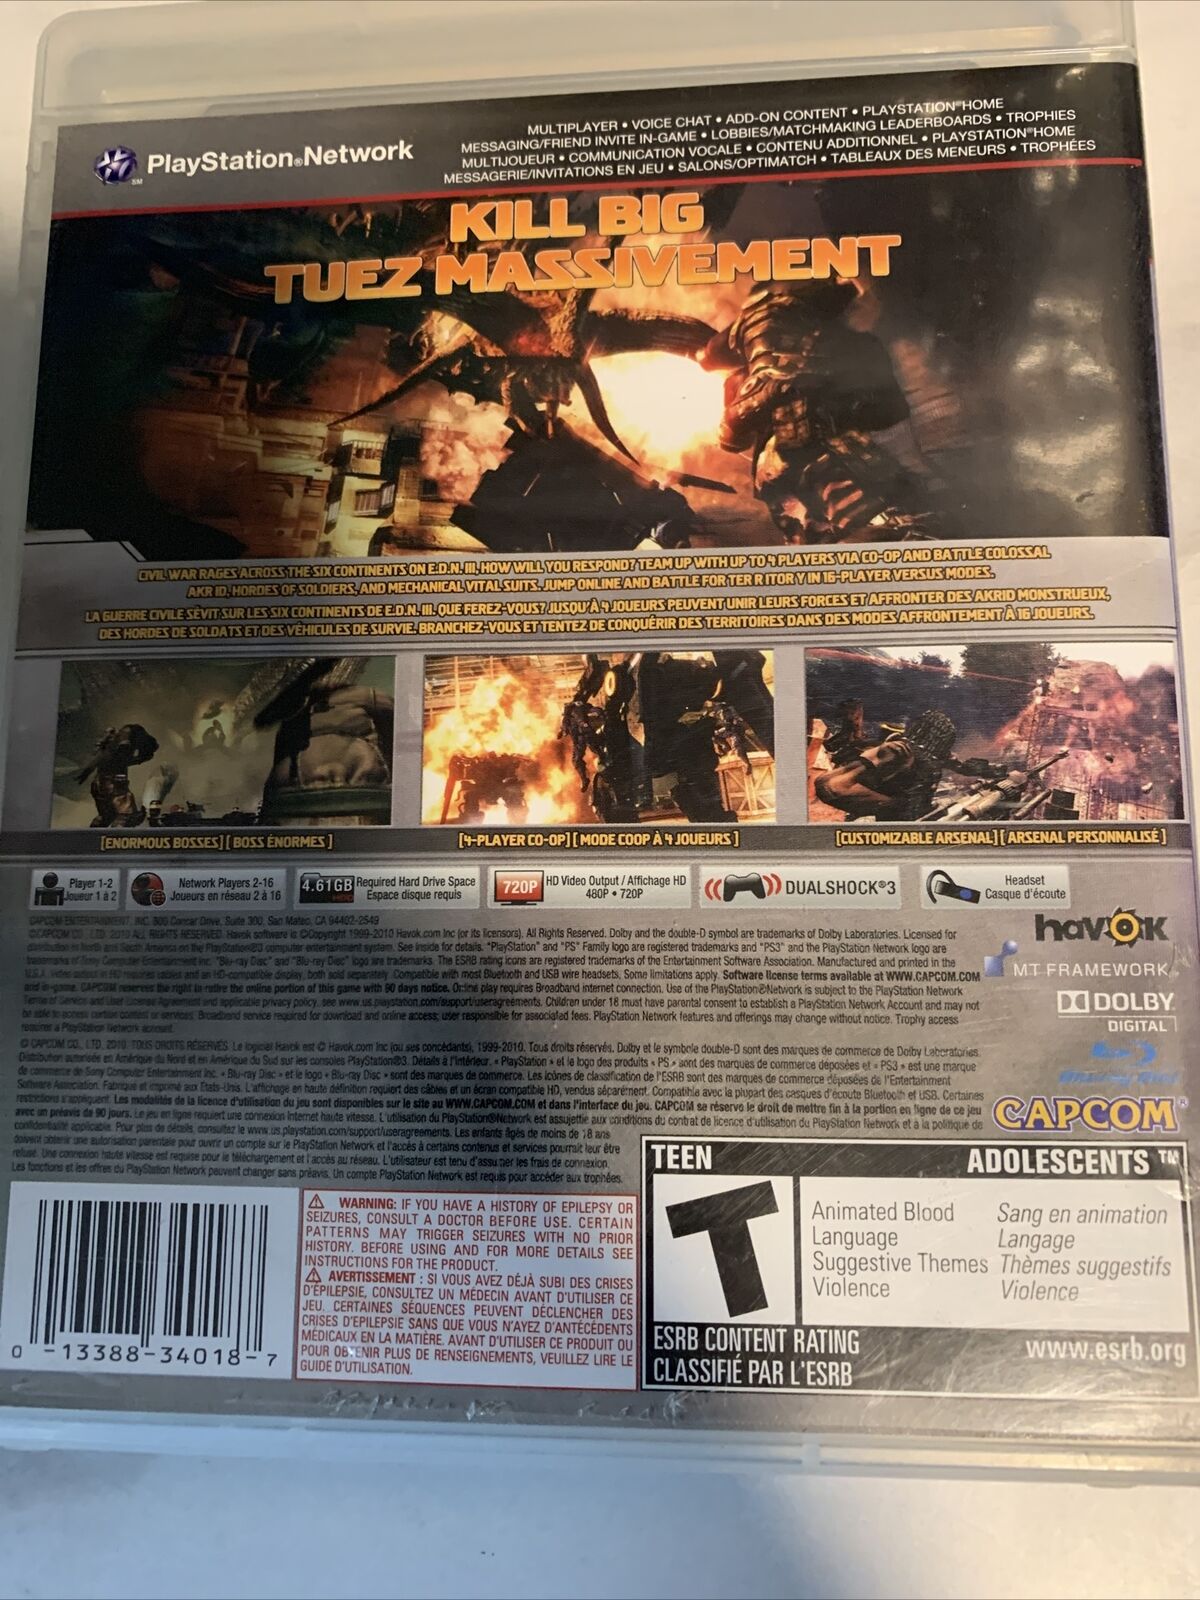 Lost Planet 2 (Sony PlayStation 3, 2010)